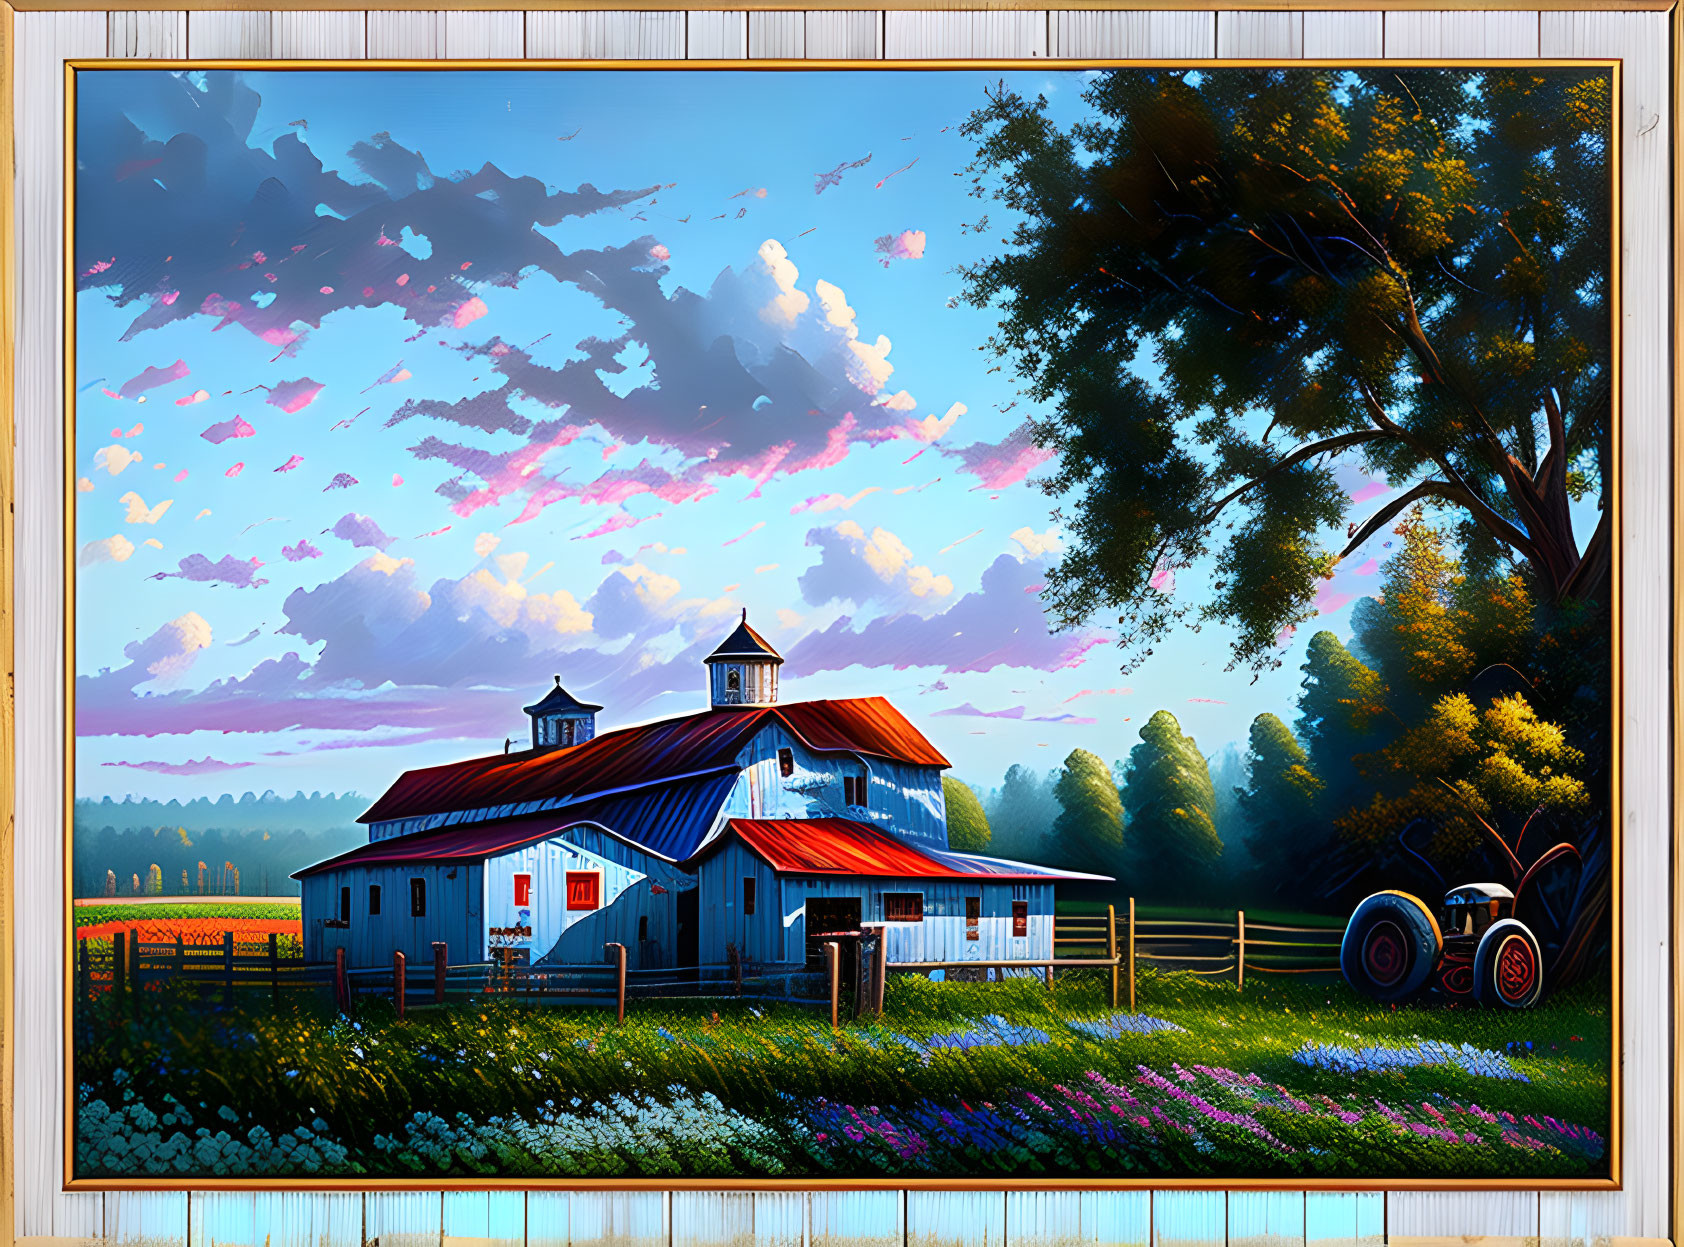 Vibrant blue barn, vintage tractor, colorful flowers in picturesque farm scene